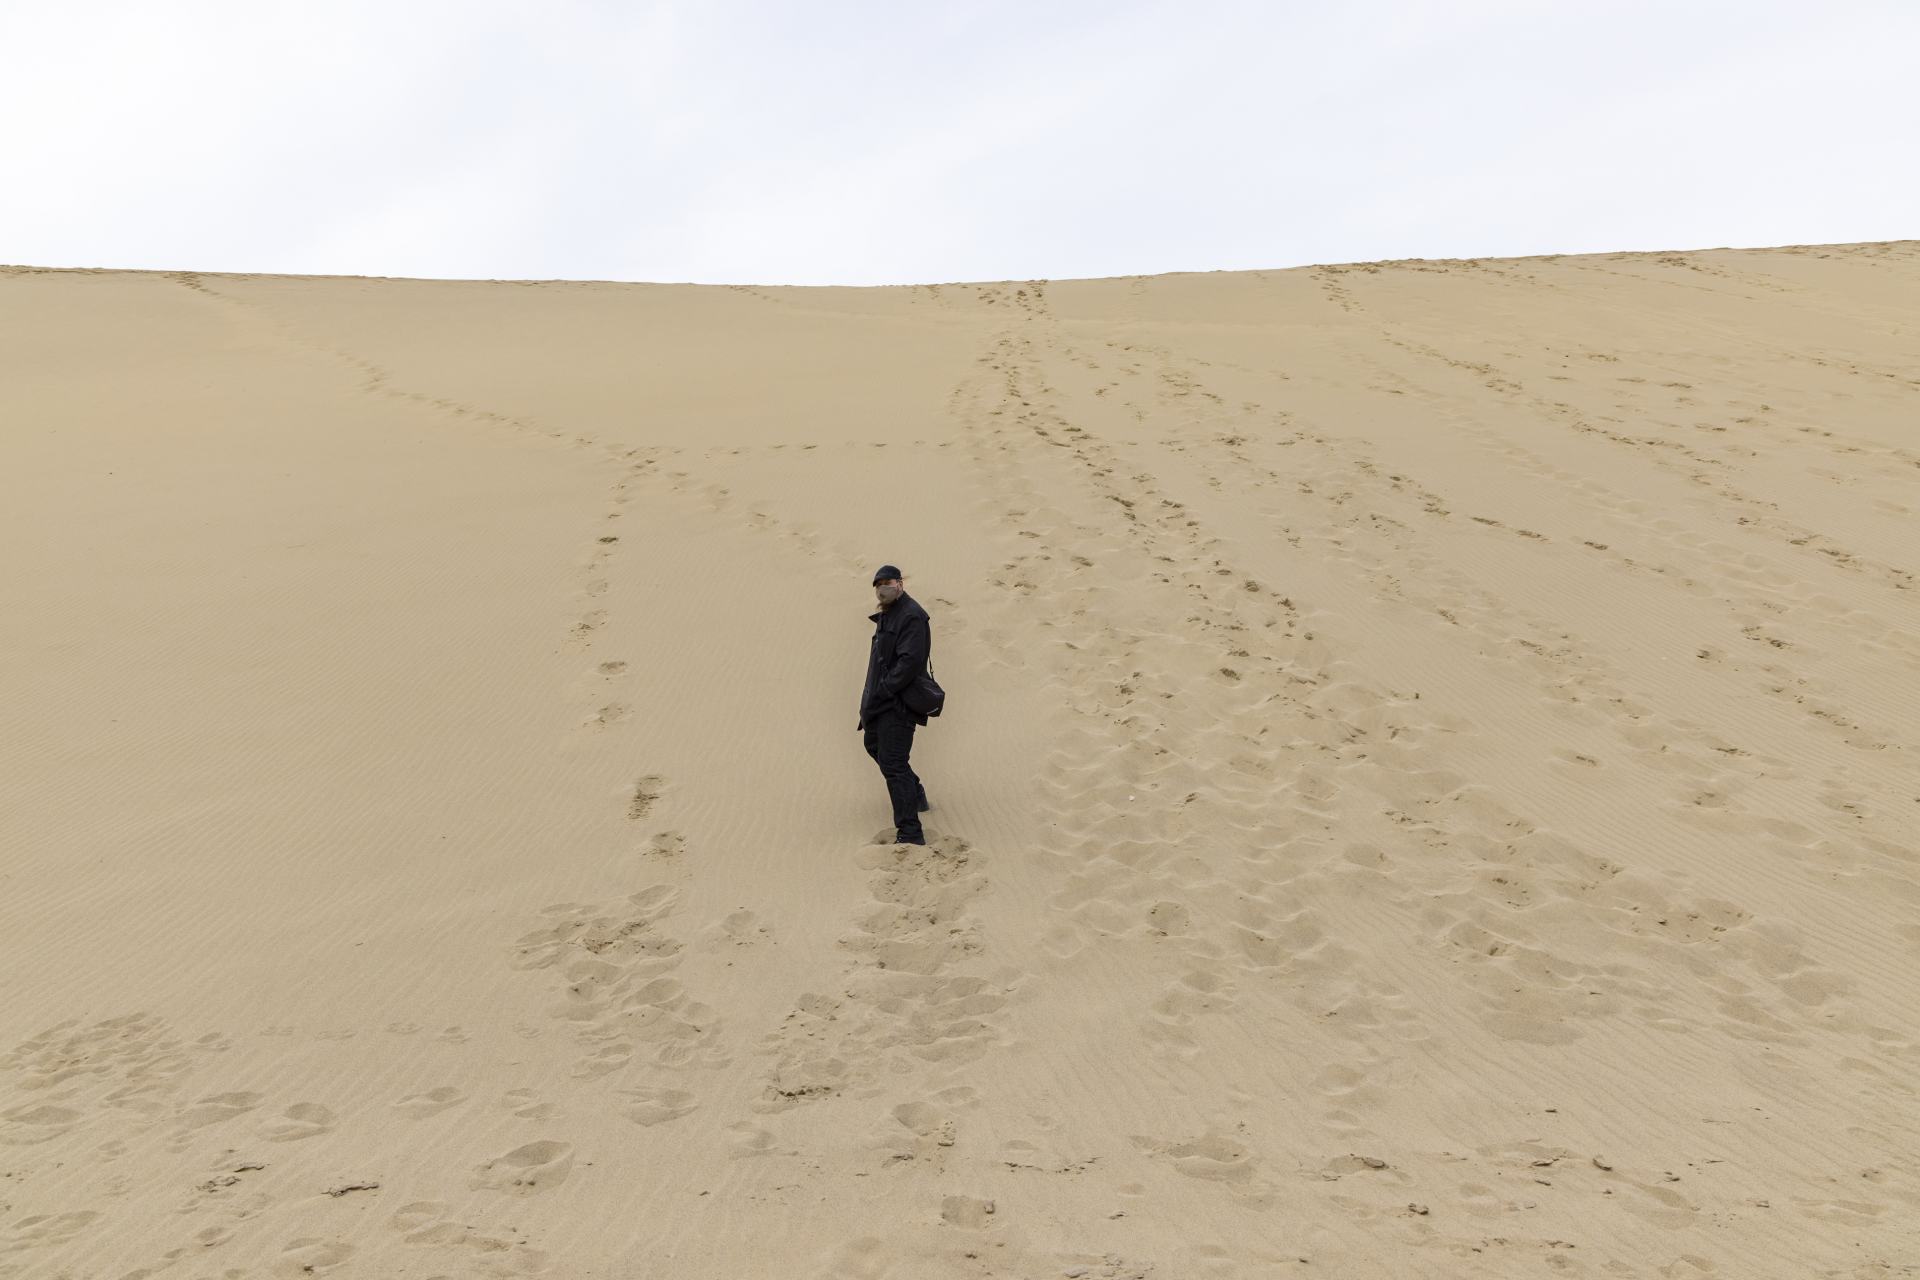 Nature reigns supreme and the people look small at the magnificent Tottori Sand Dunes.